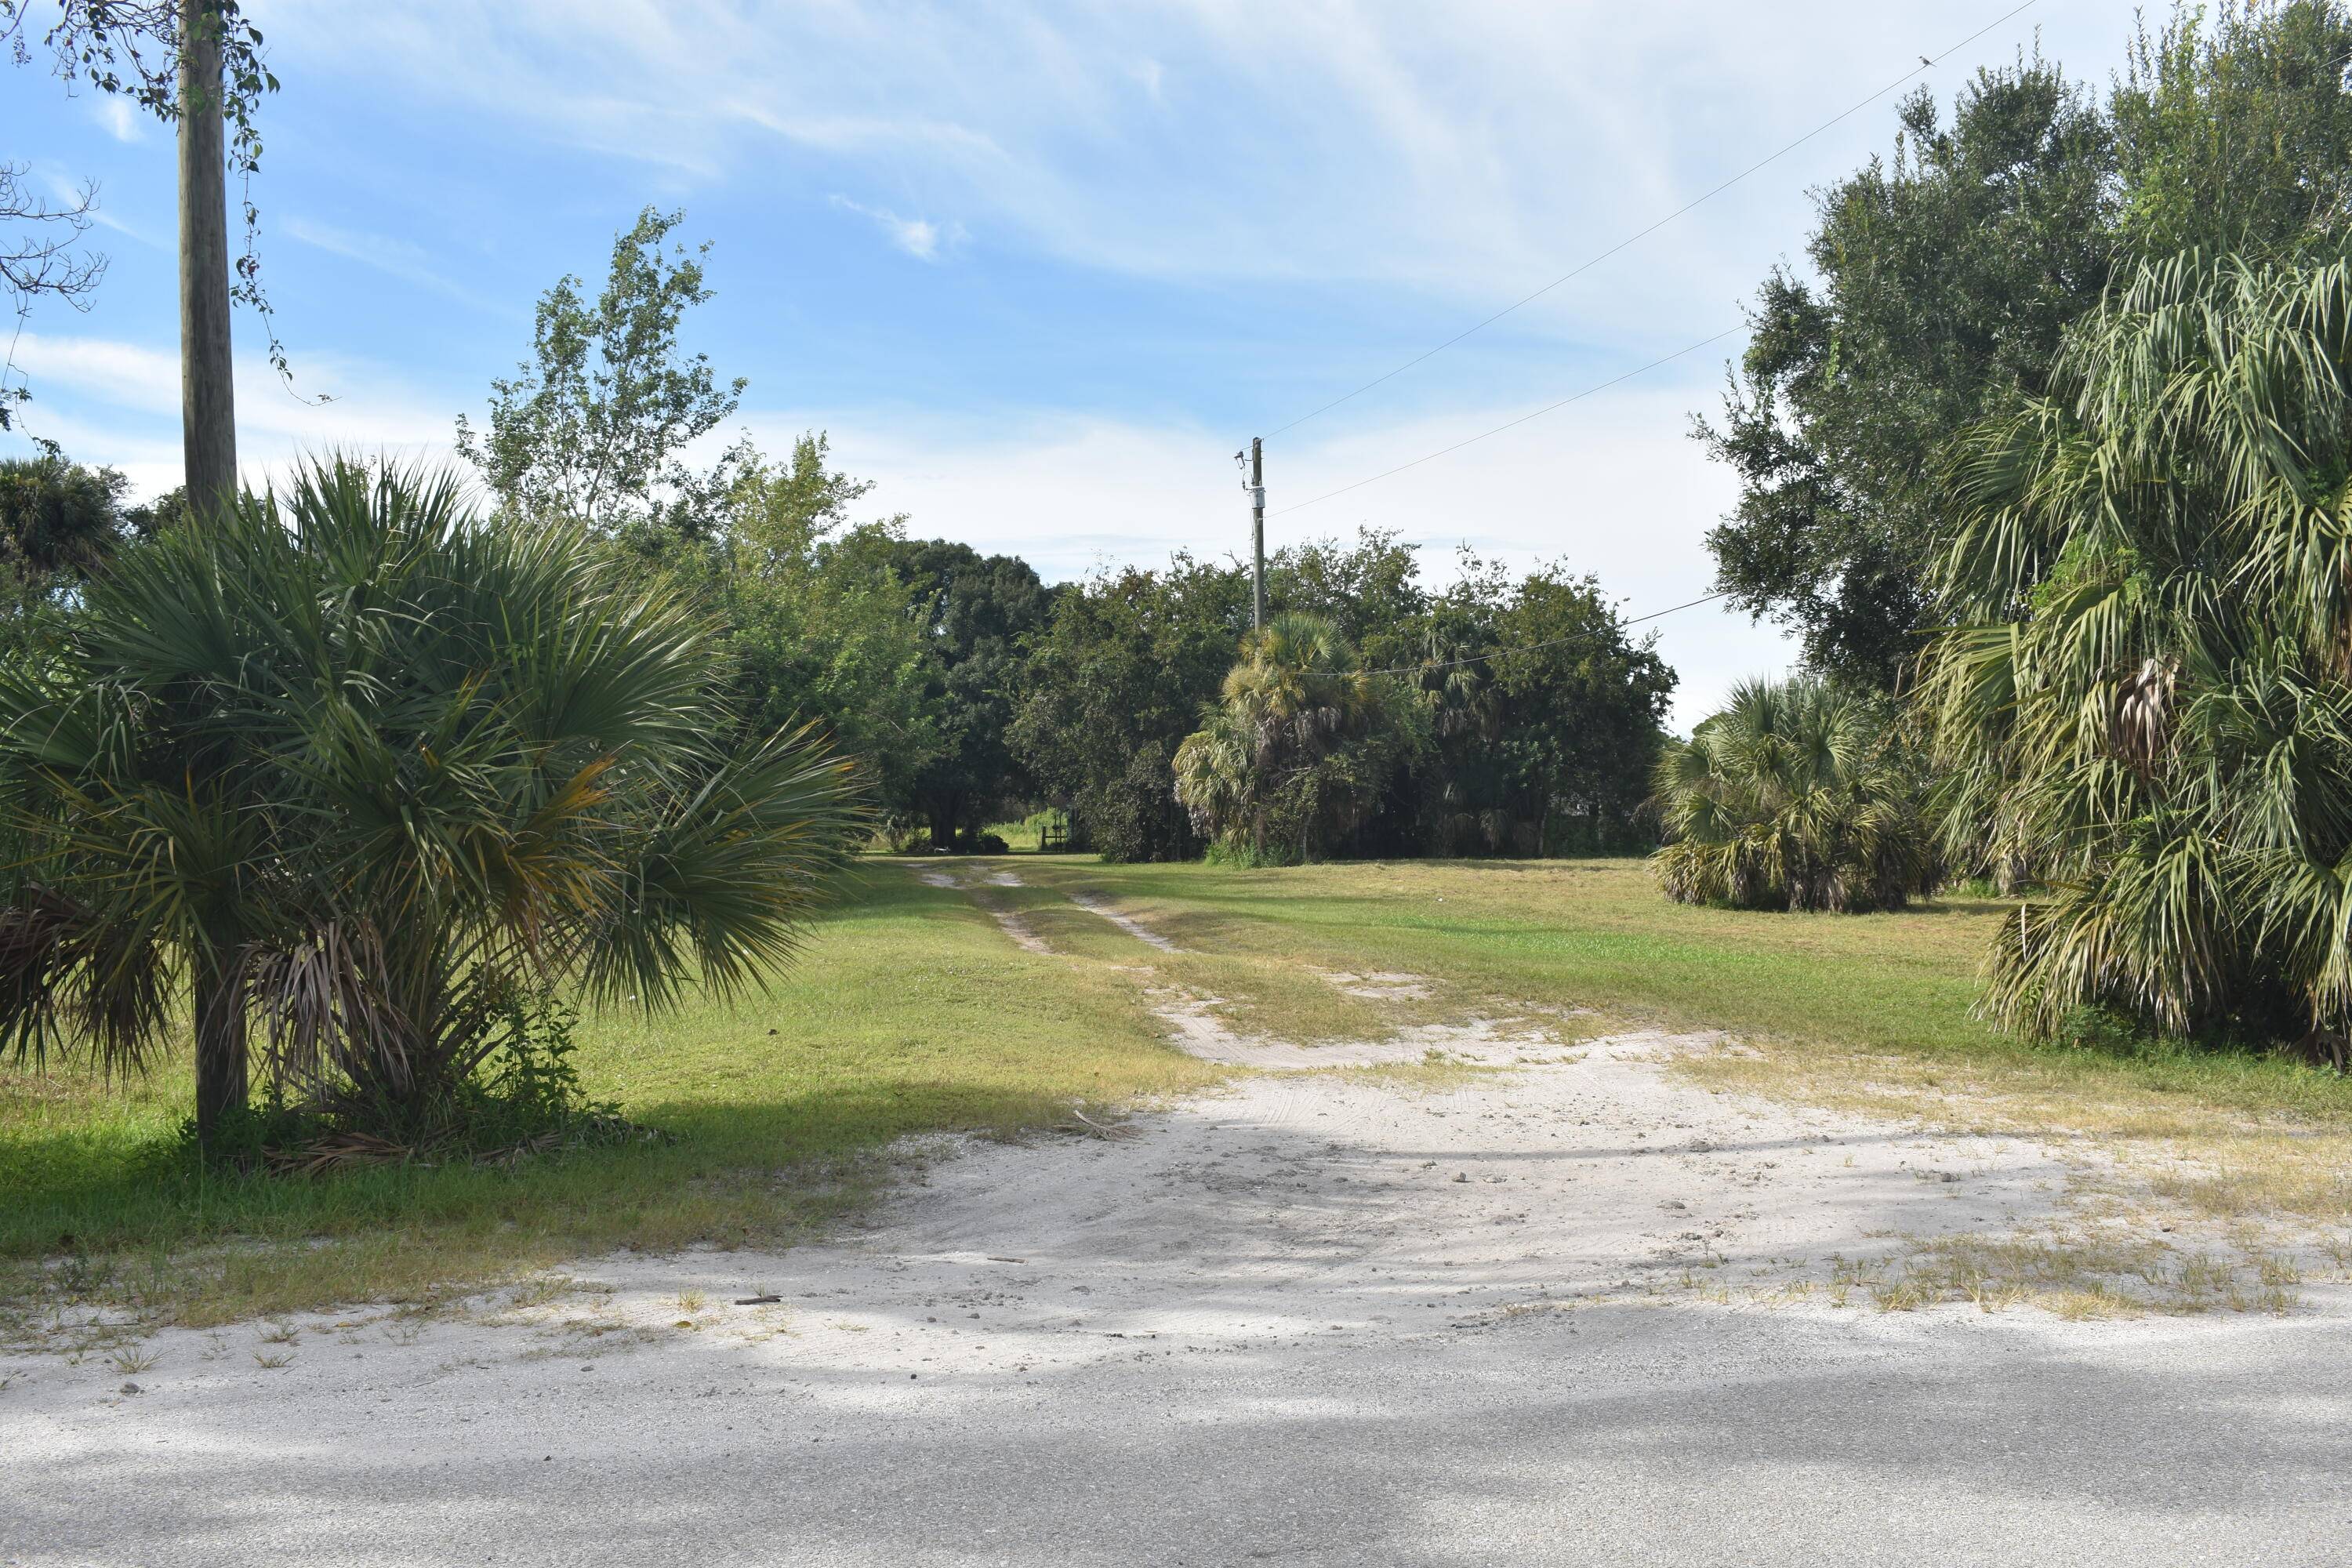 Calling All Developers ! Unique Zoning SF2 right in Downtown City of Okeechobee.